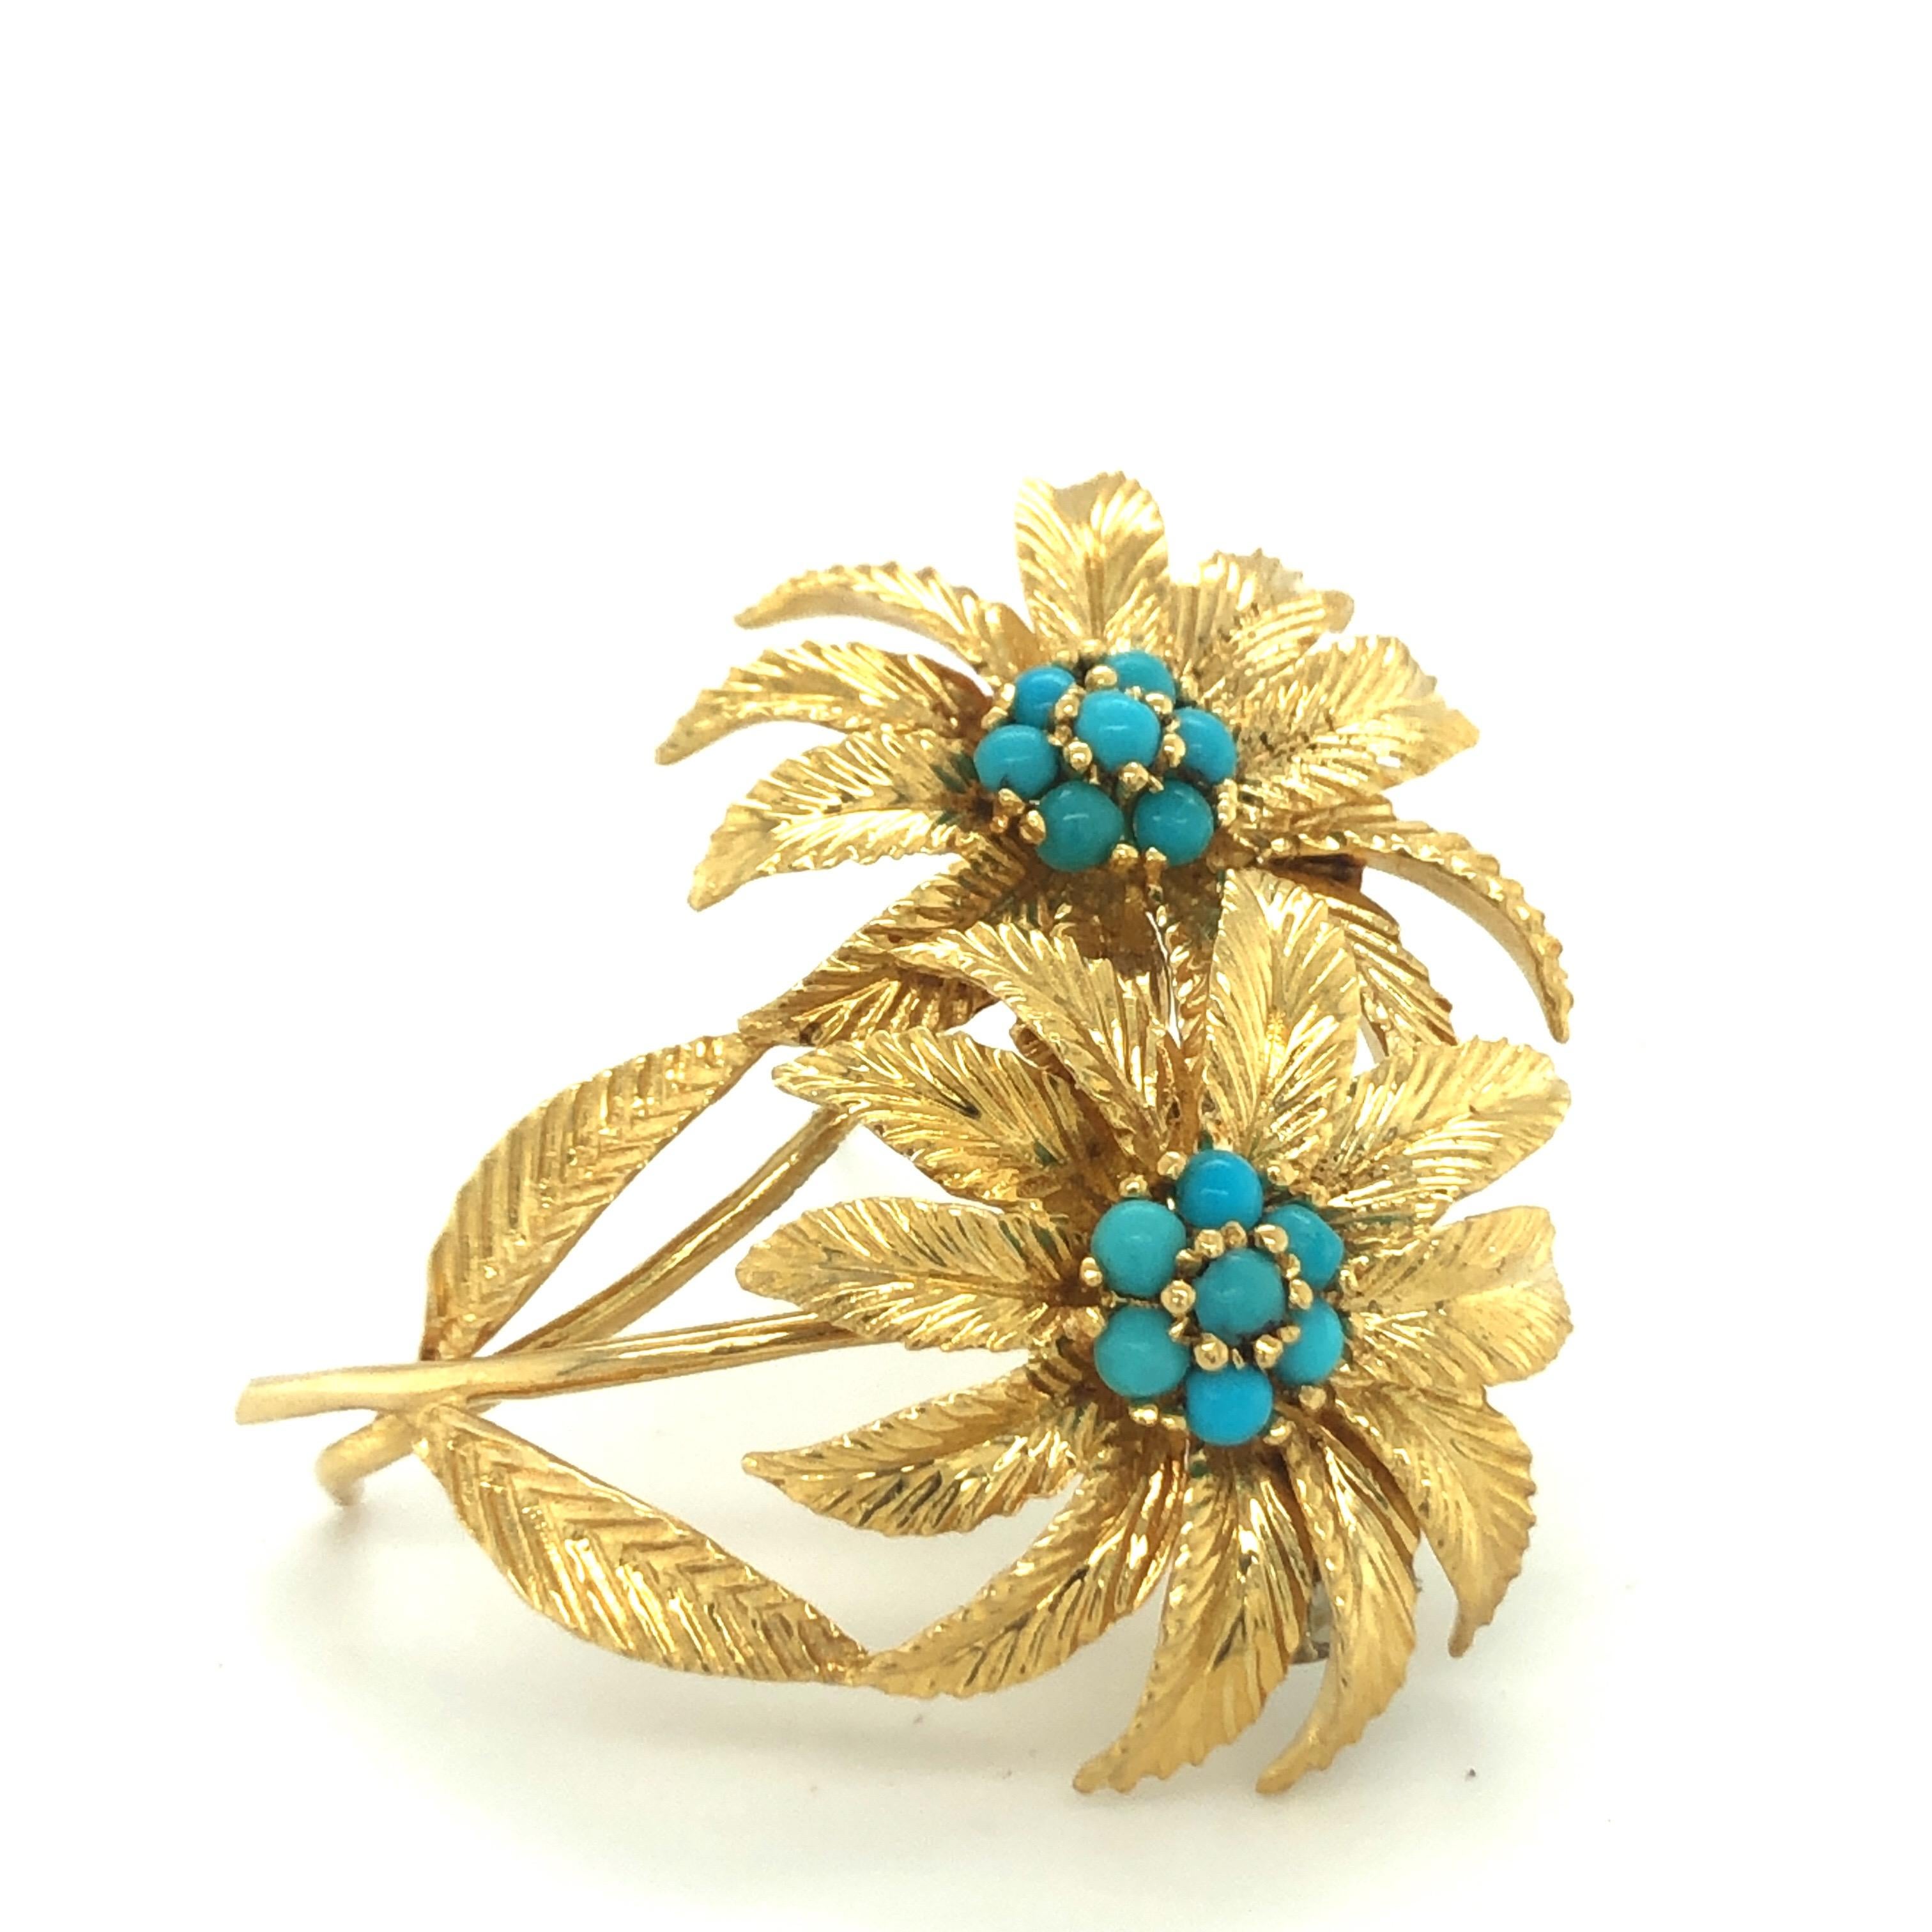 Modern 18 Karat Yellow Gold and Turquoise Flower Brooch